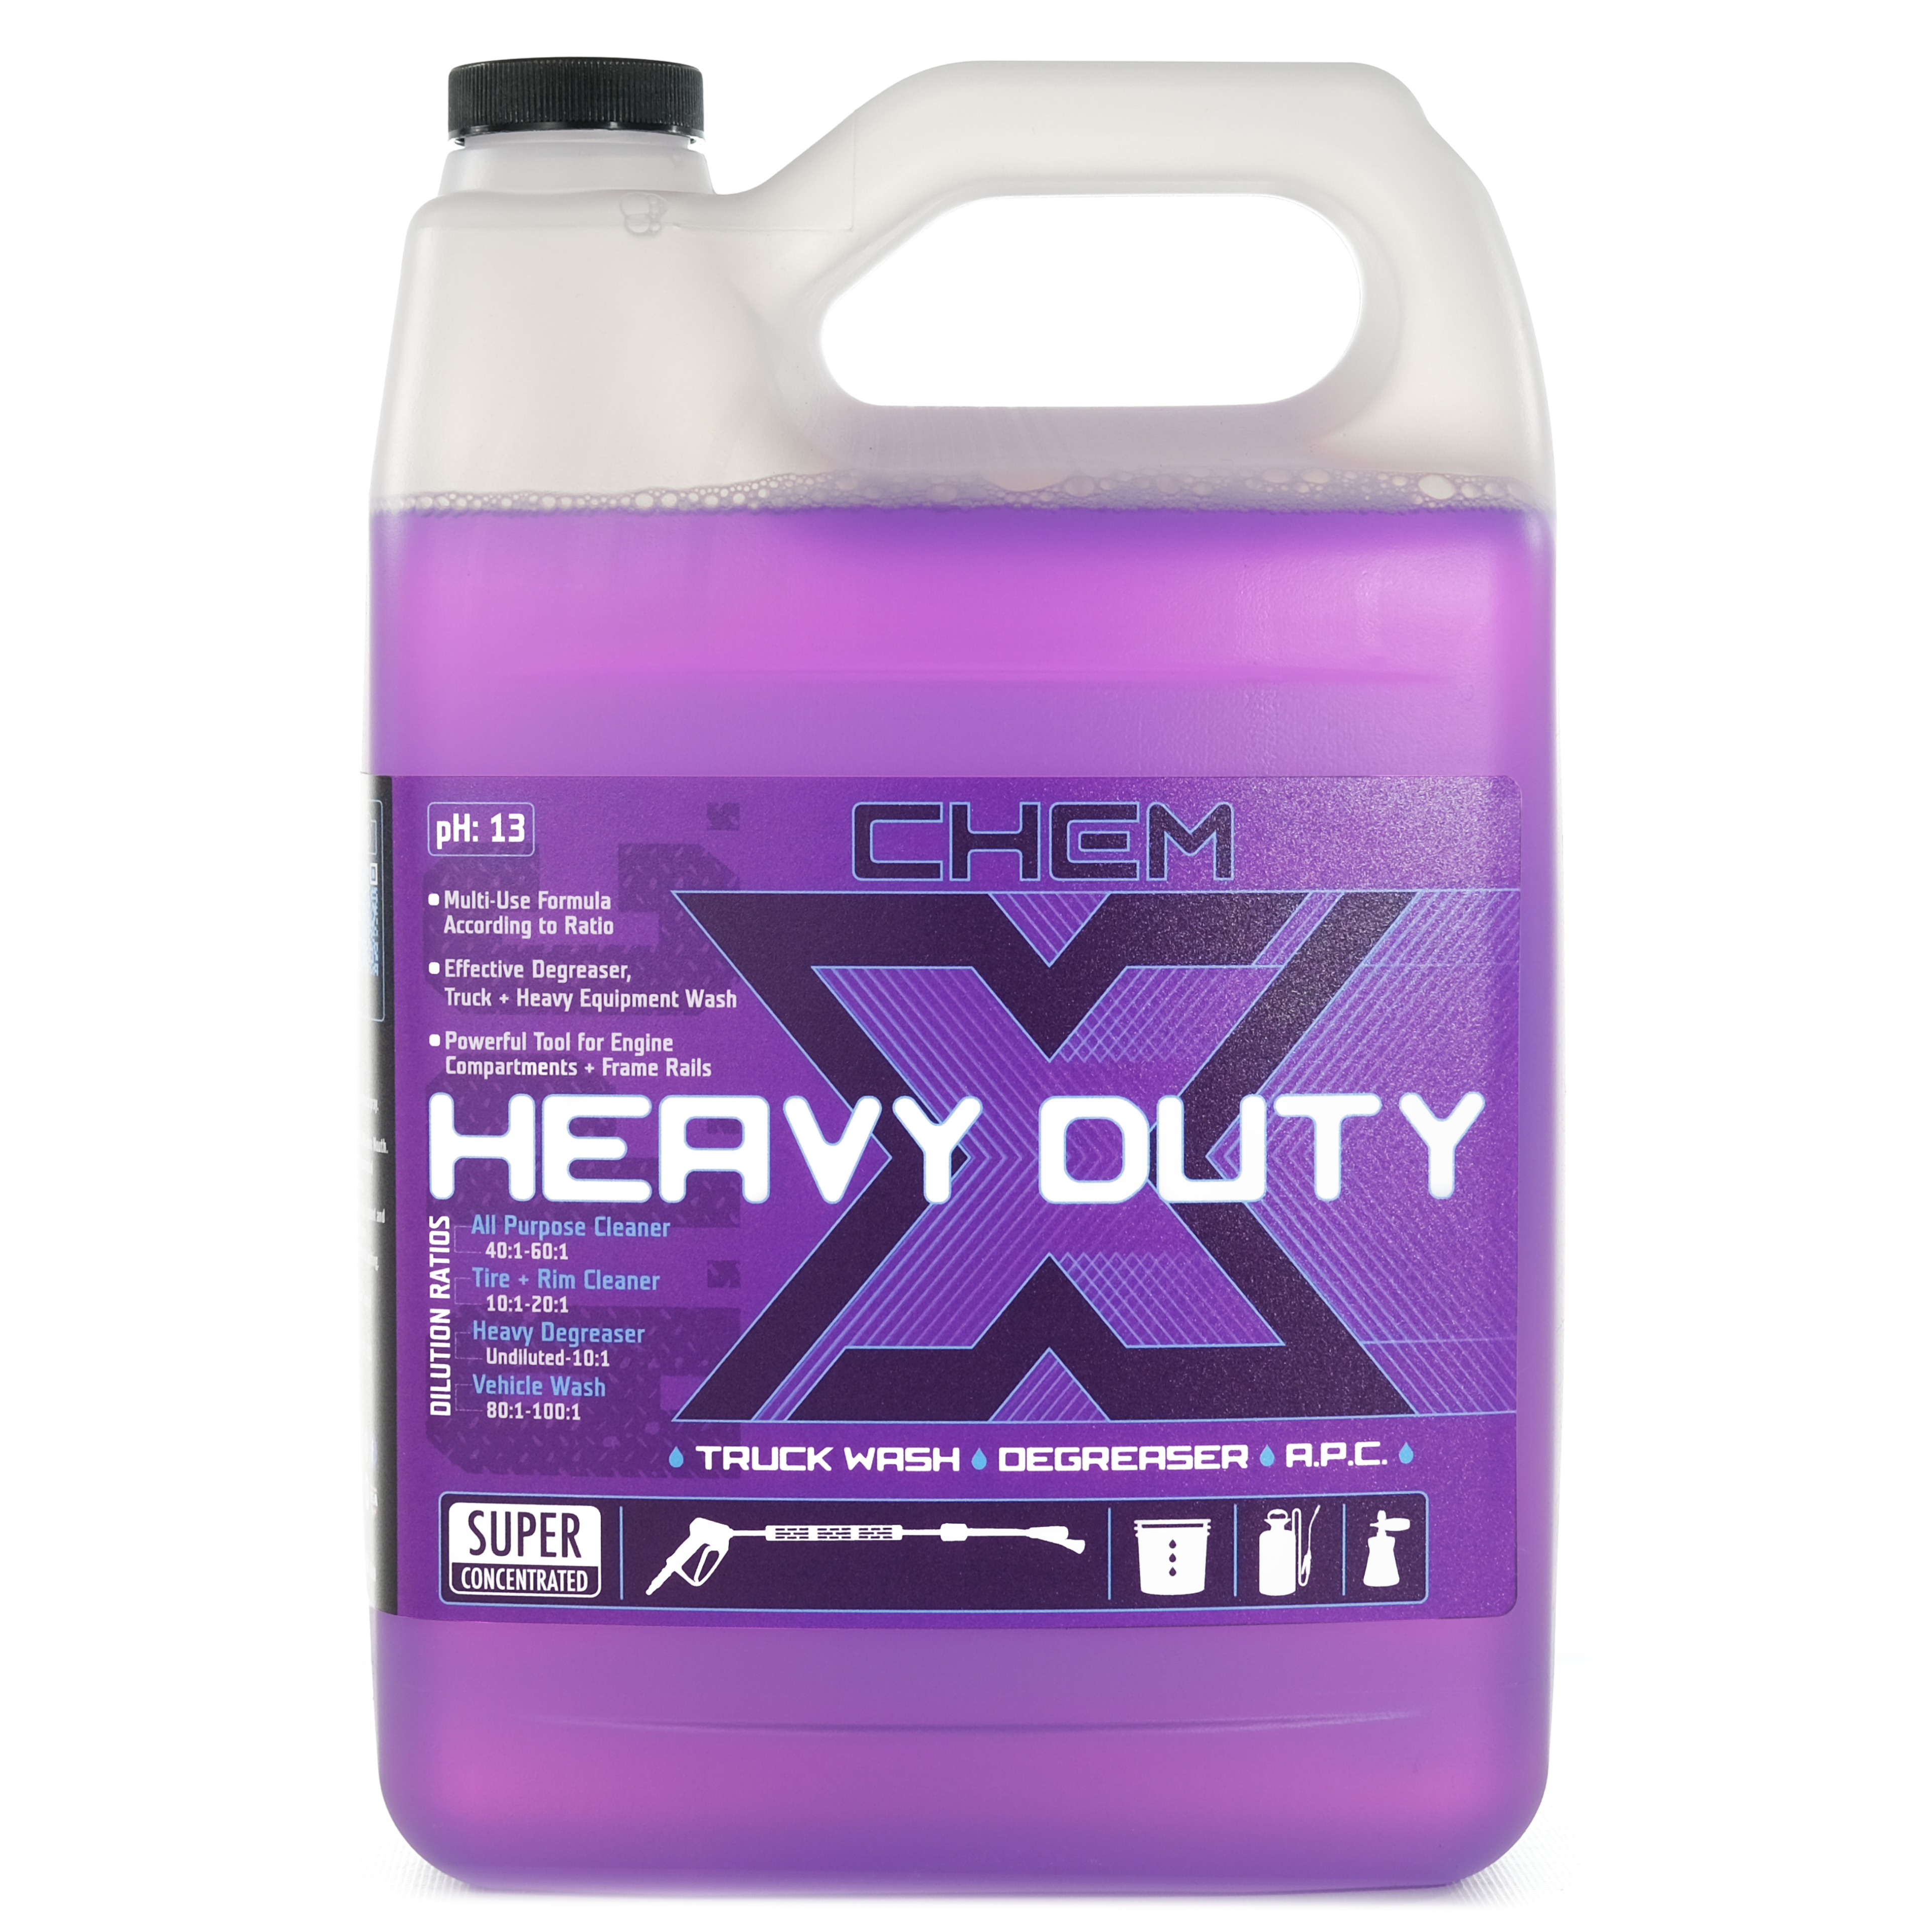 Heavy Duty Multi Purpose Cleaner Concentrate – All American Car Care  Products